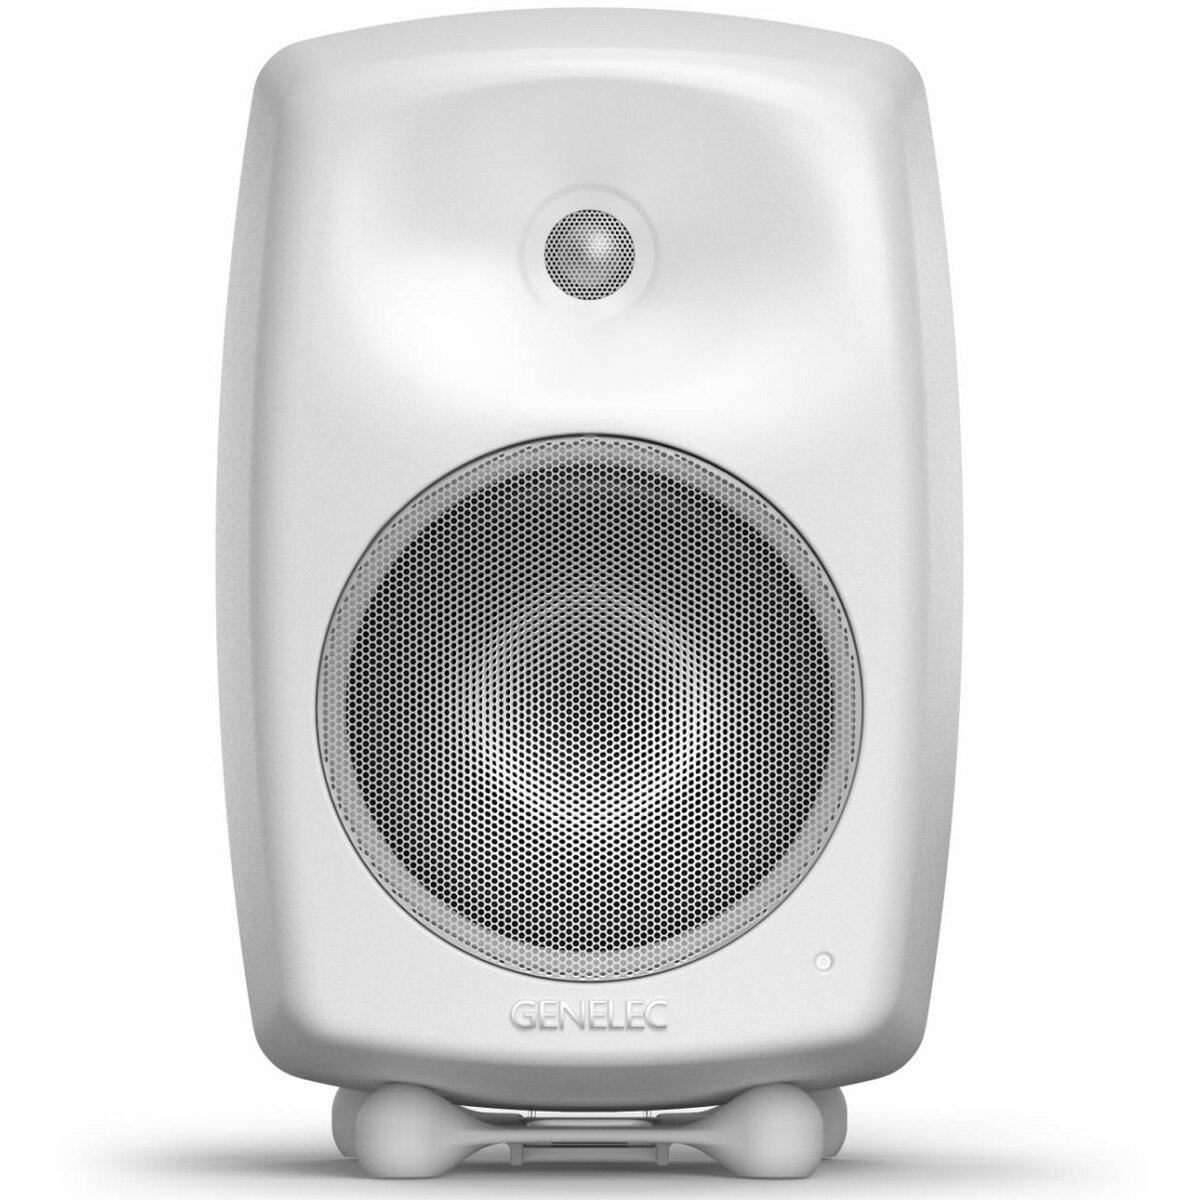 GENELEC ジェネレック / G Four ホワイト (1本) Home Audio Systems【お取り寄せ商品】